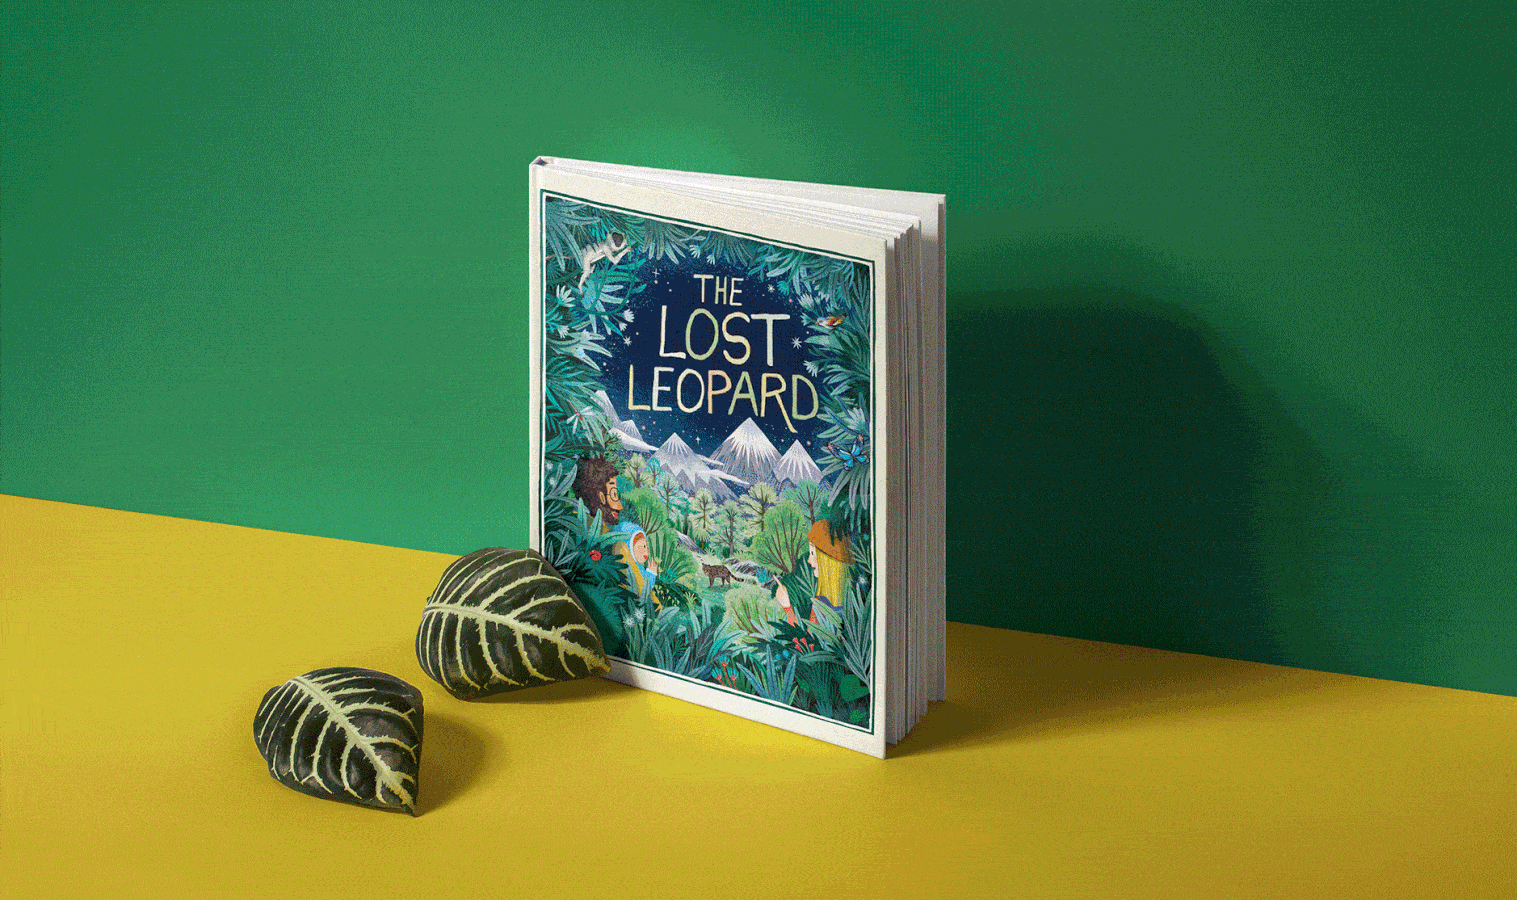 The lost leopard - book for children with illustrations